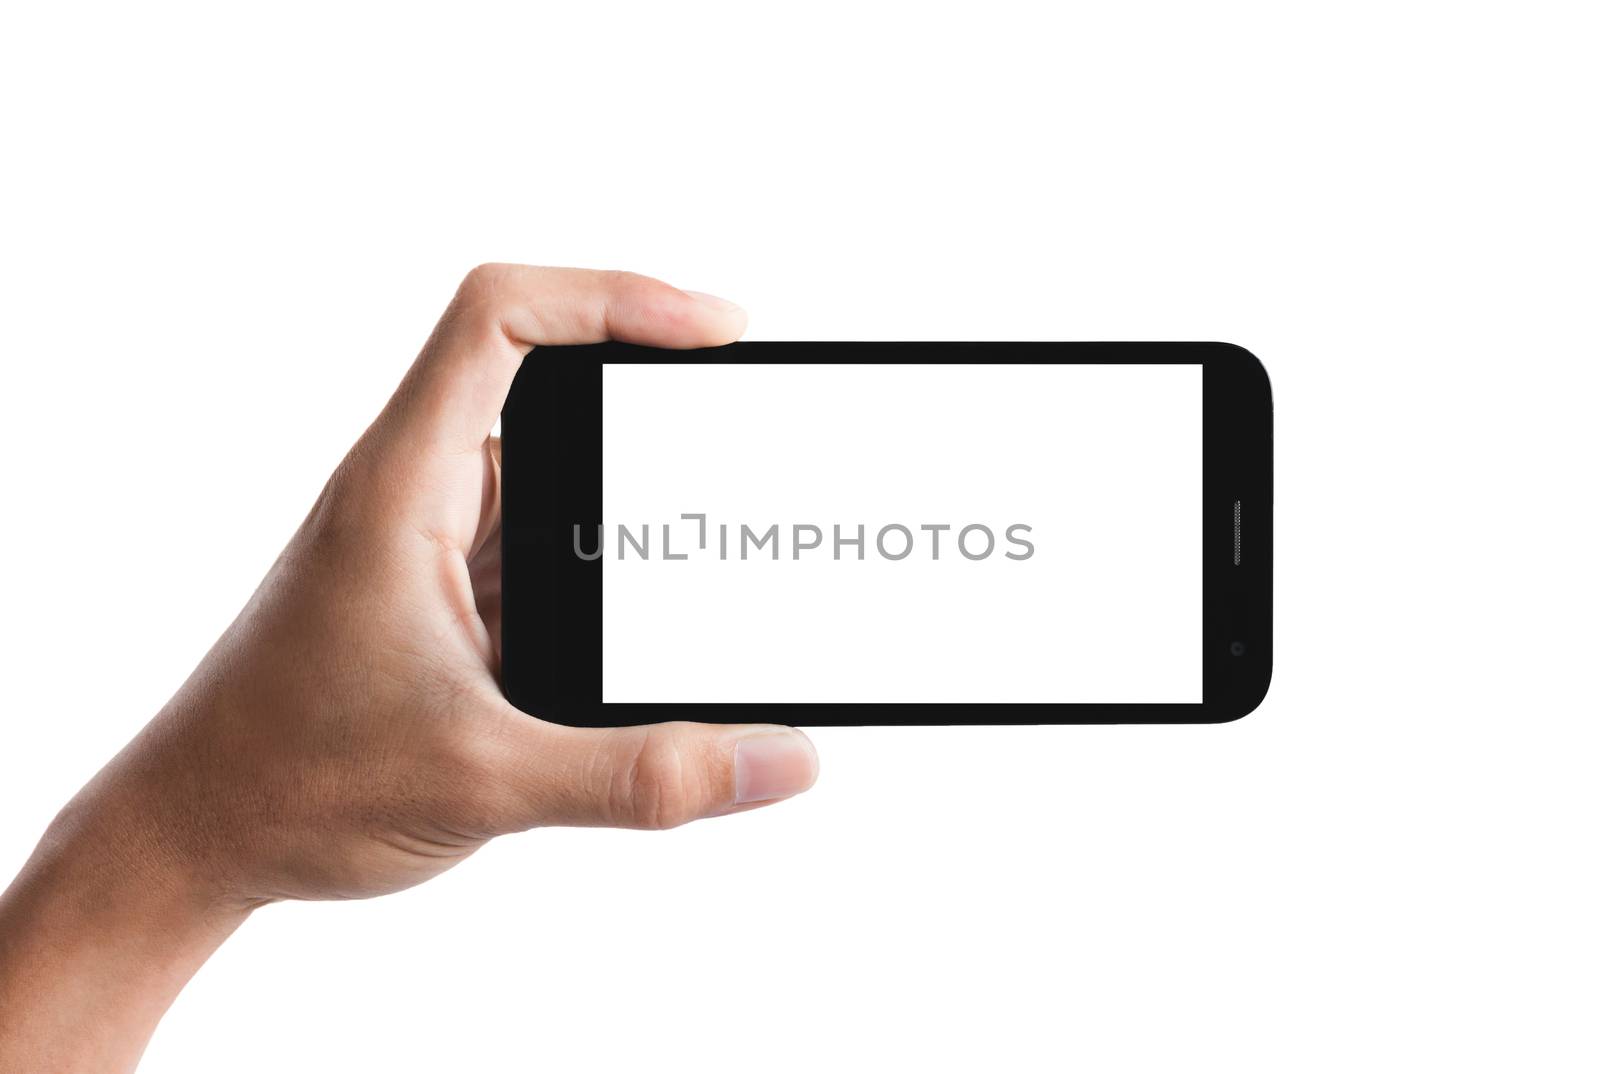 hand holding the smartphone isolated on white background.